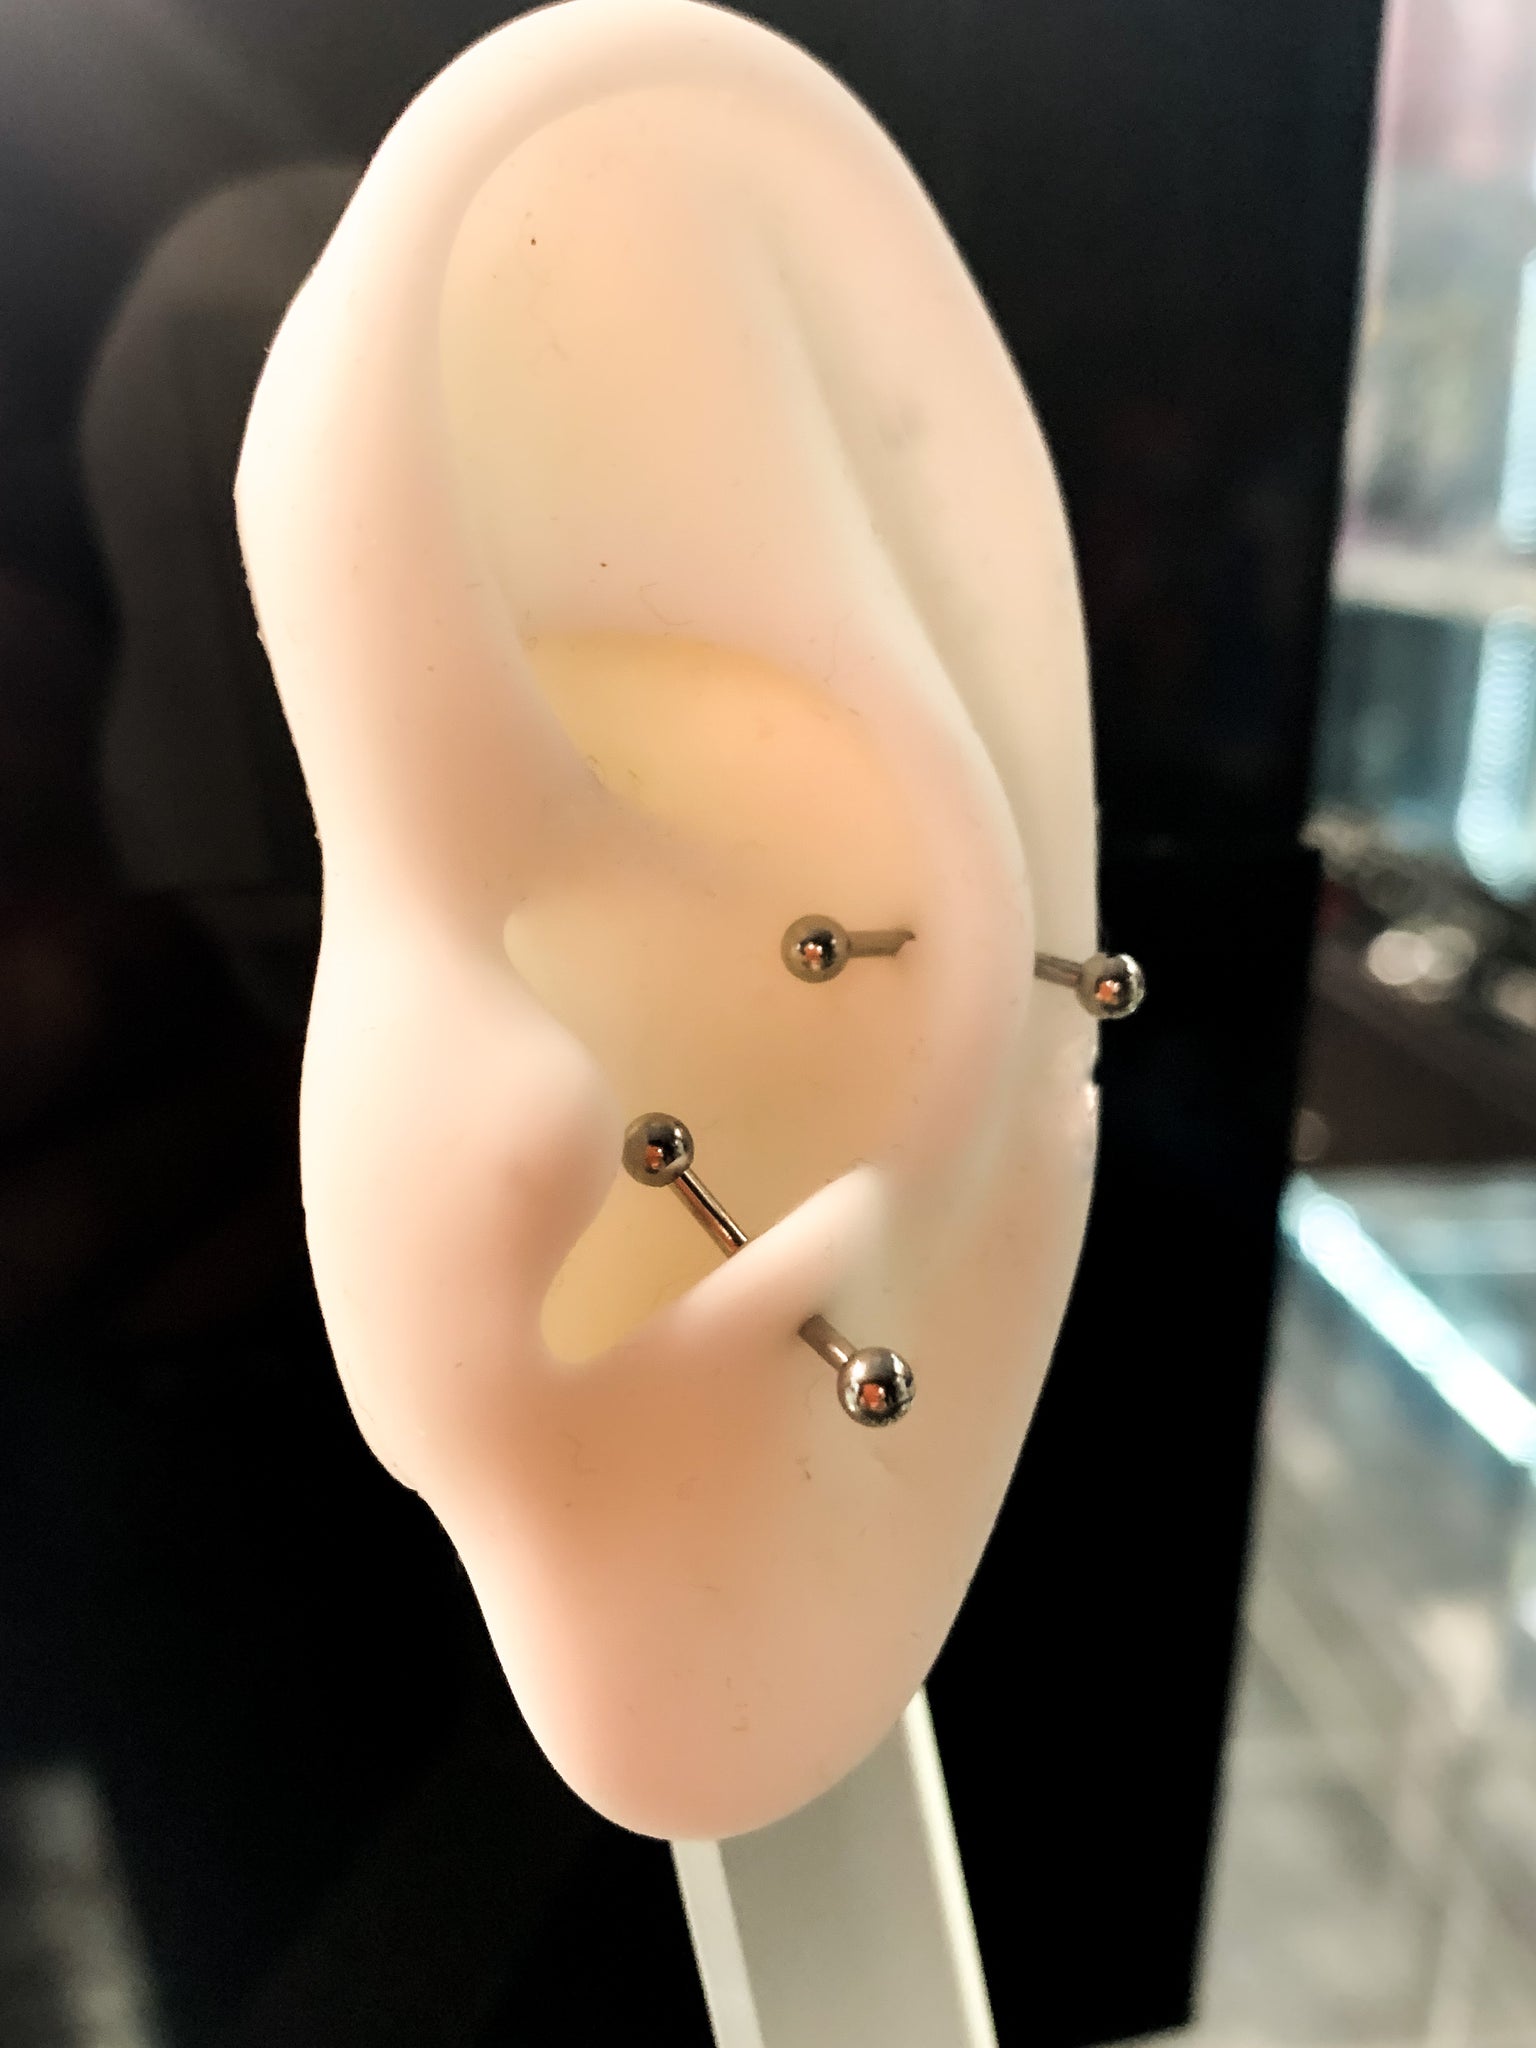 Snug or Anti-Tragus piercing appointment with Pic & Mix @ 17 Fountain Street